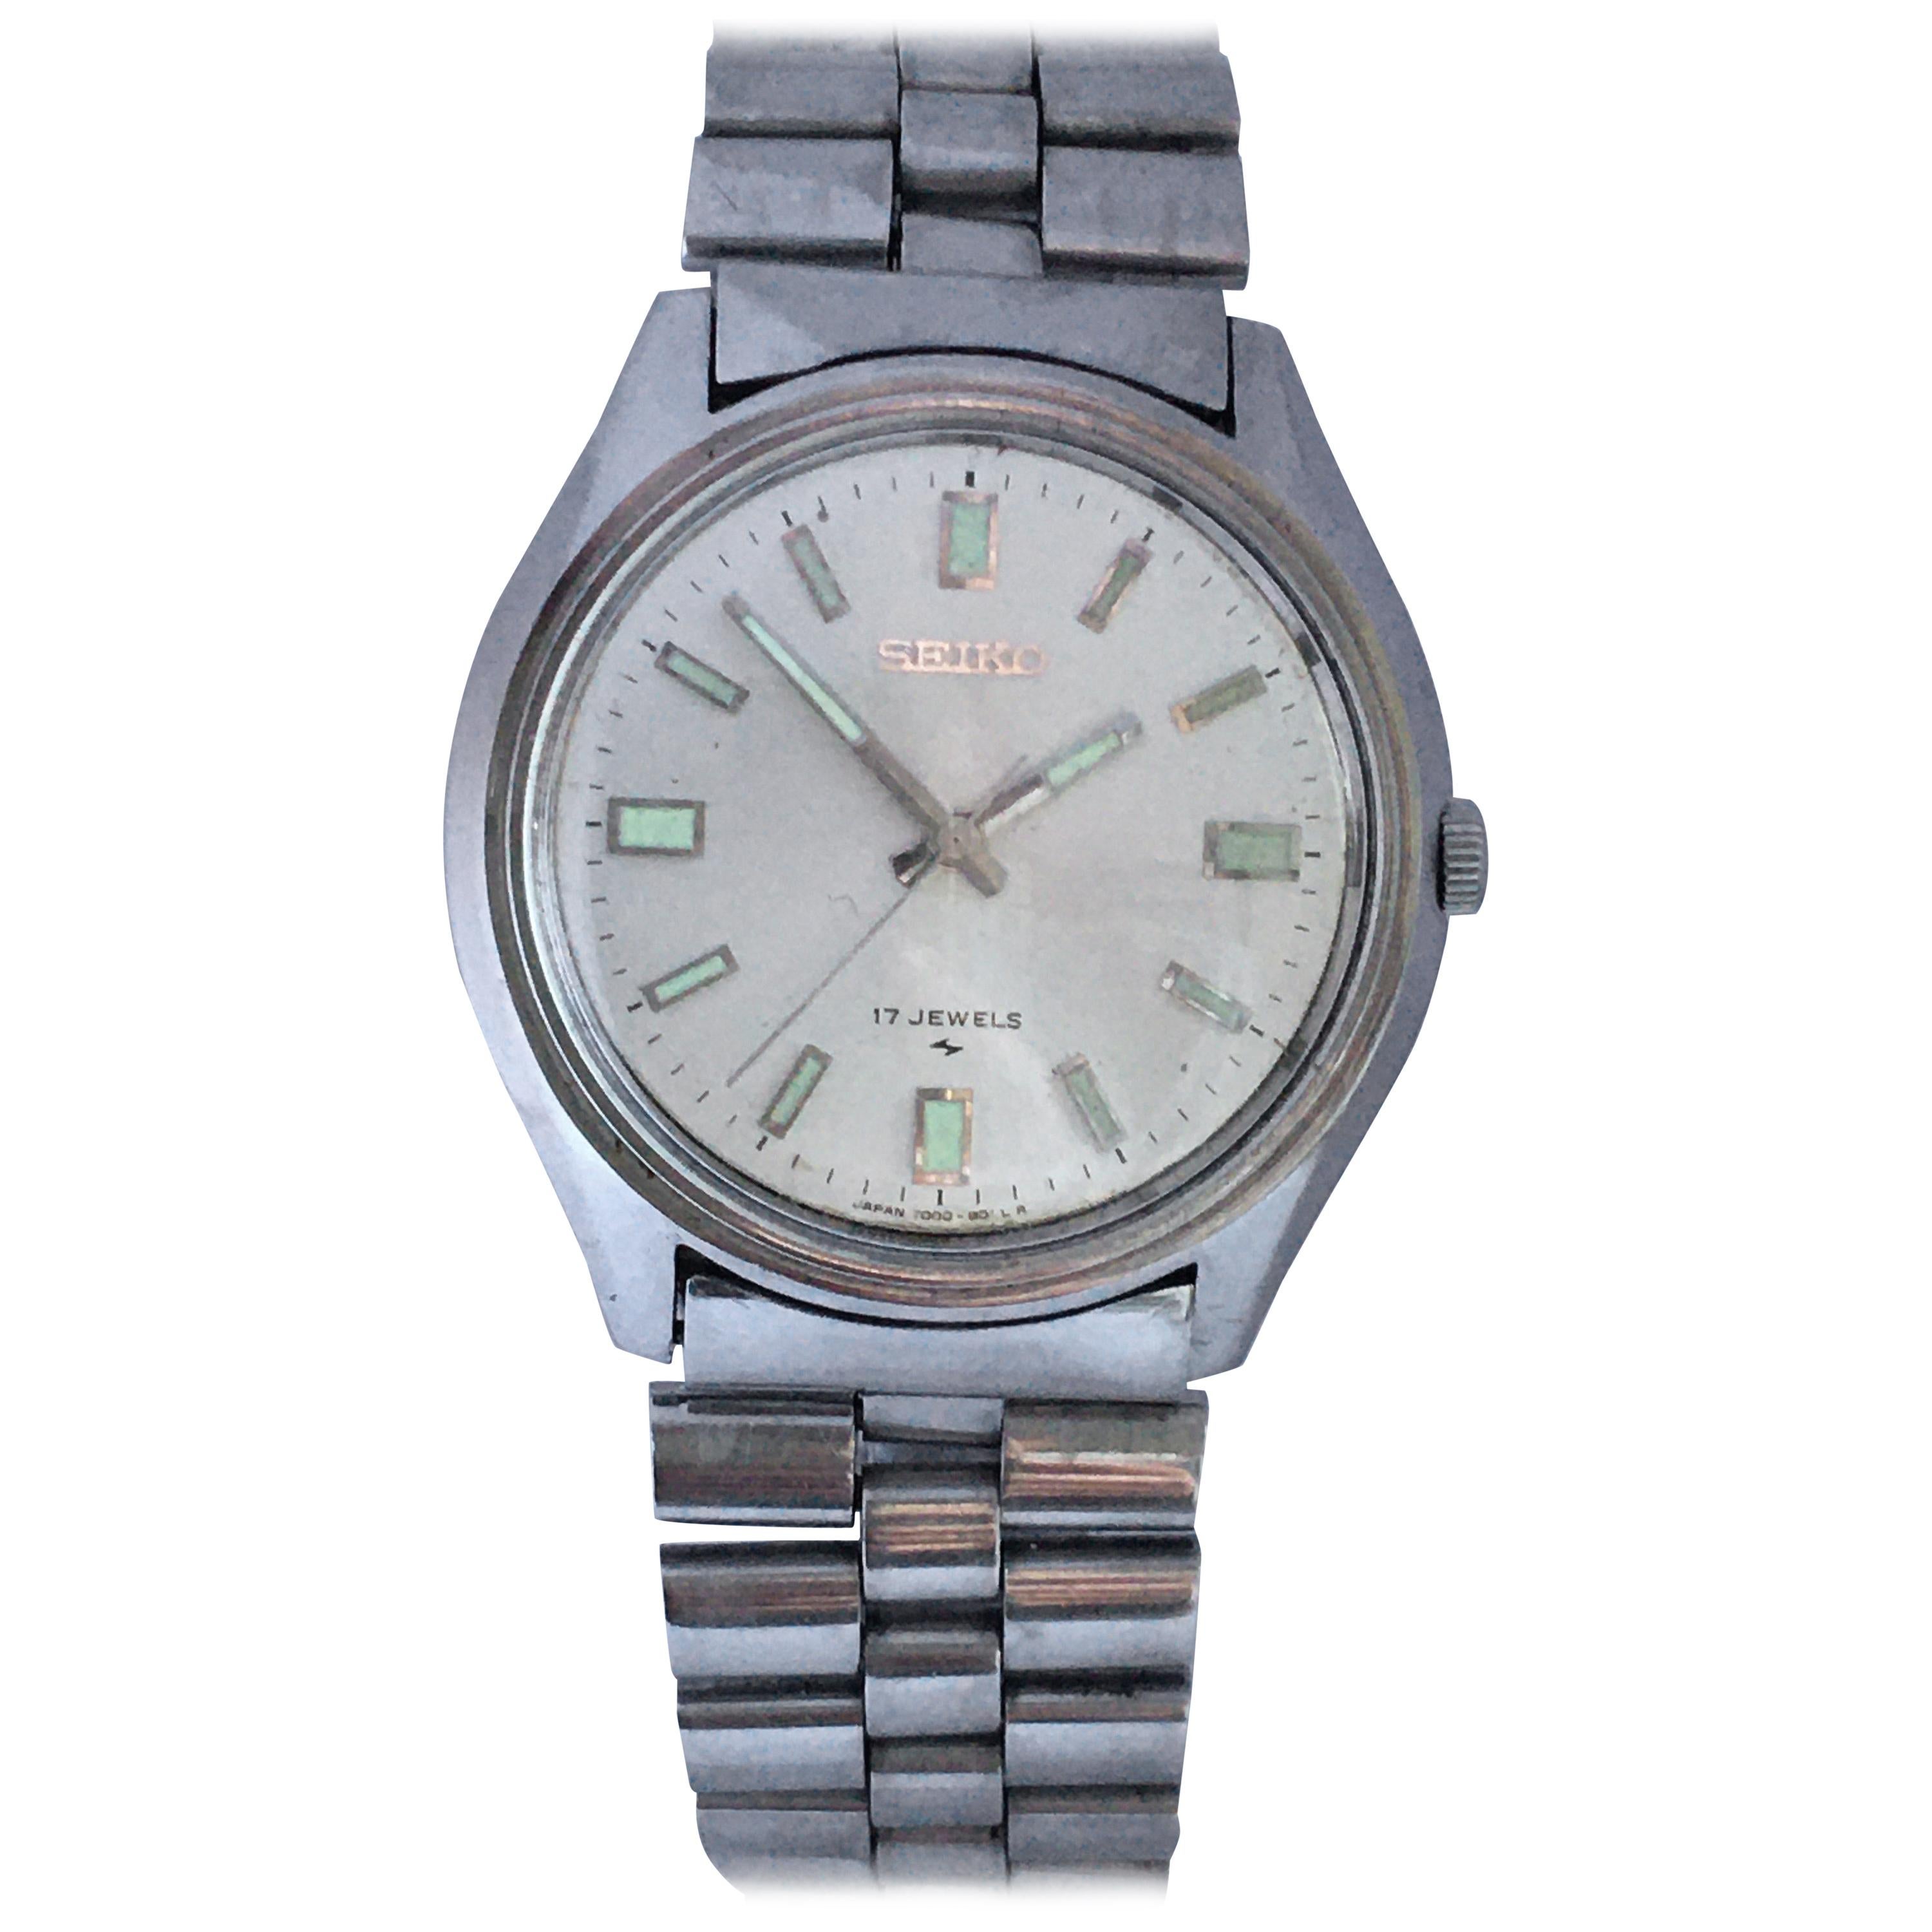 Vintage 1970s Stainless Steel Seiko 17 Jewels Mechanical Watch at 1stDibs